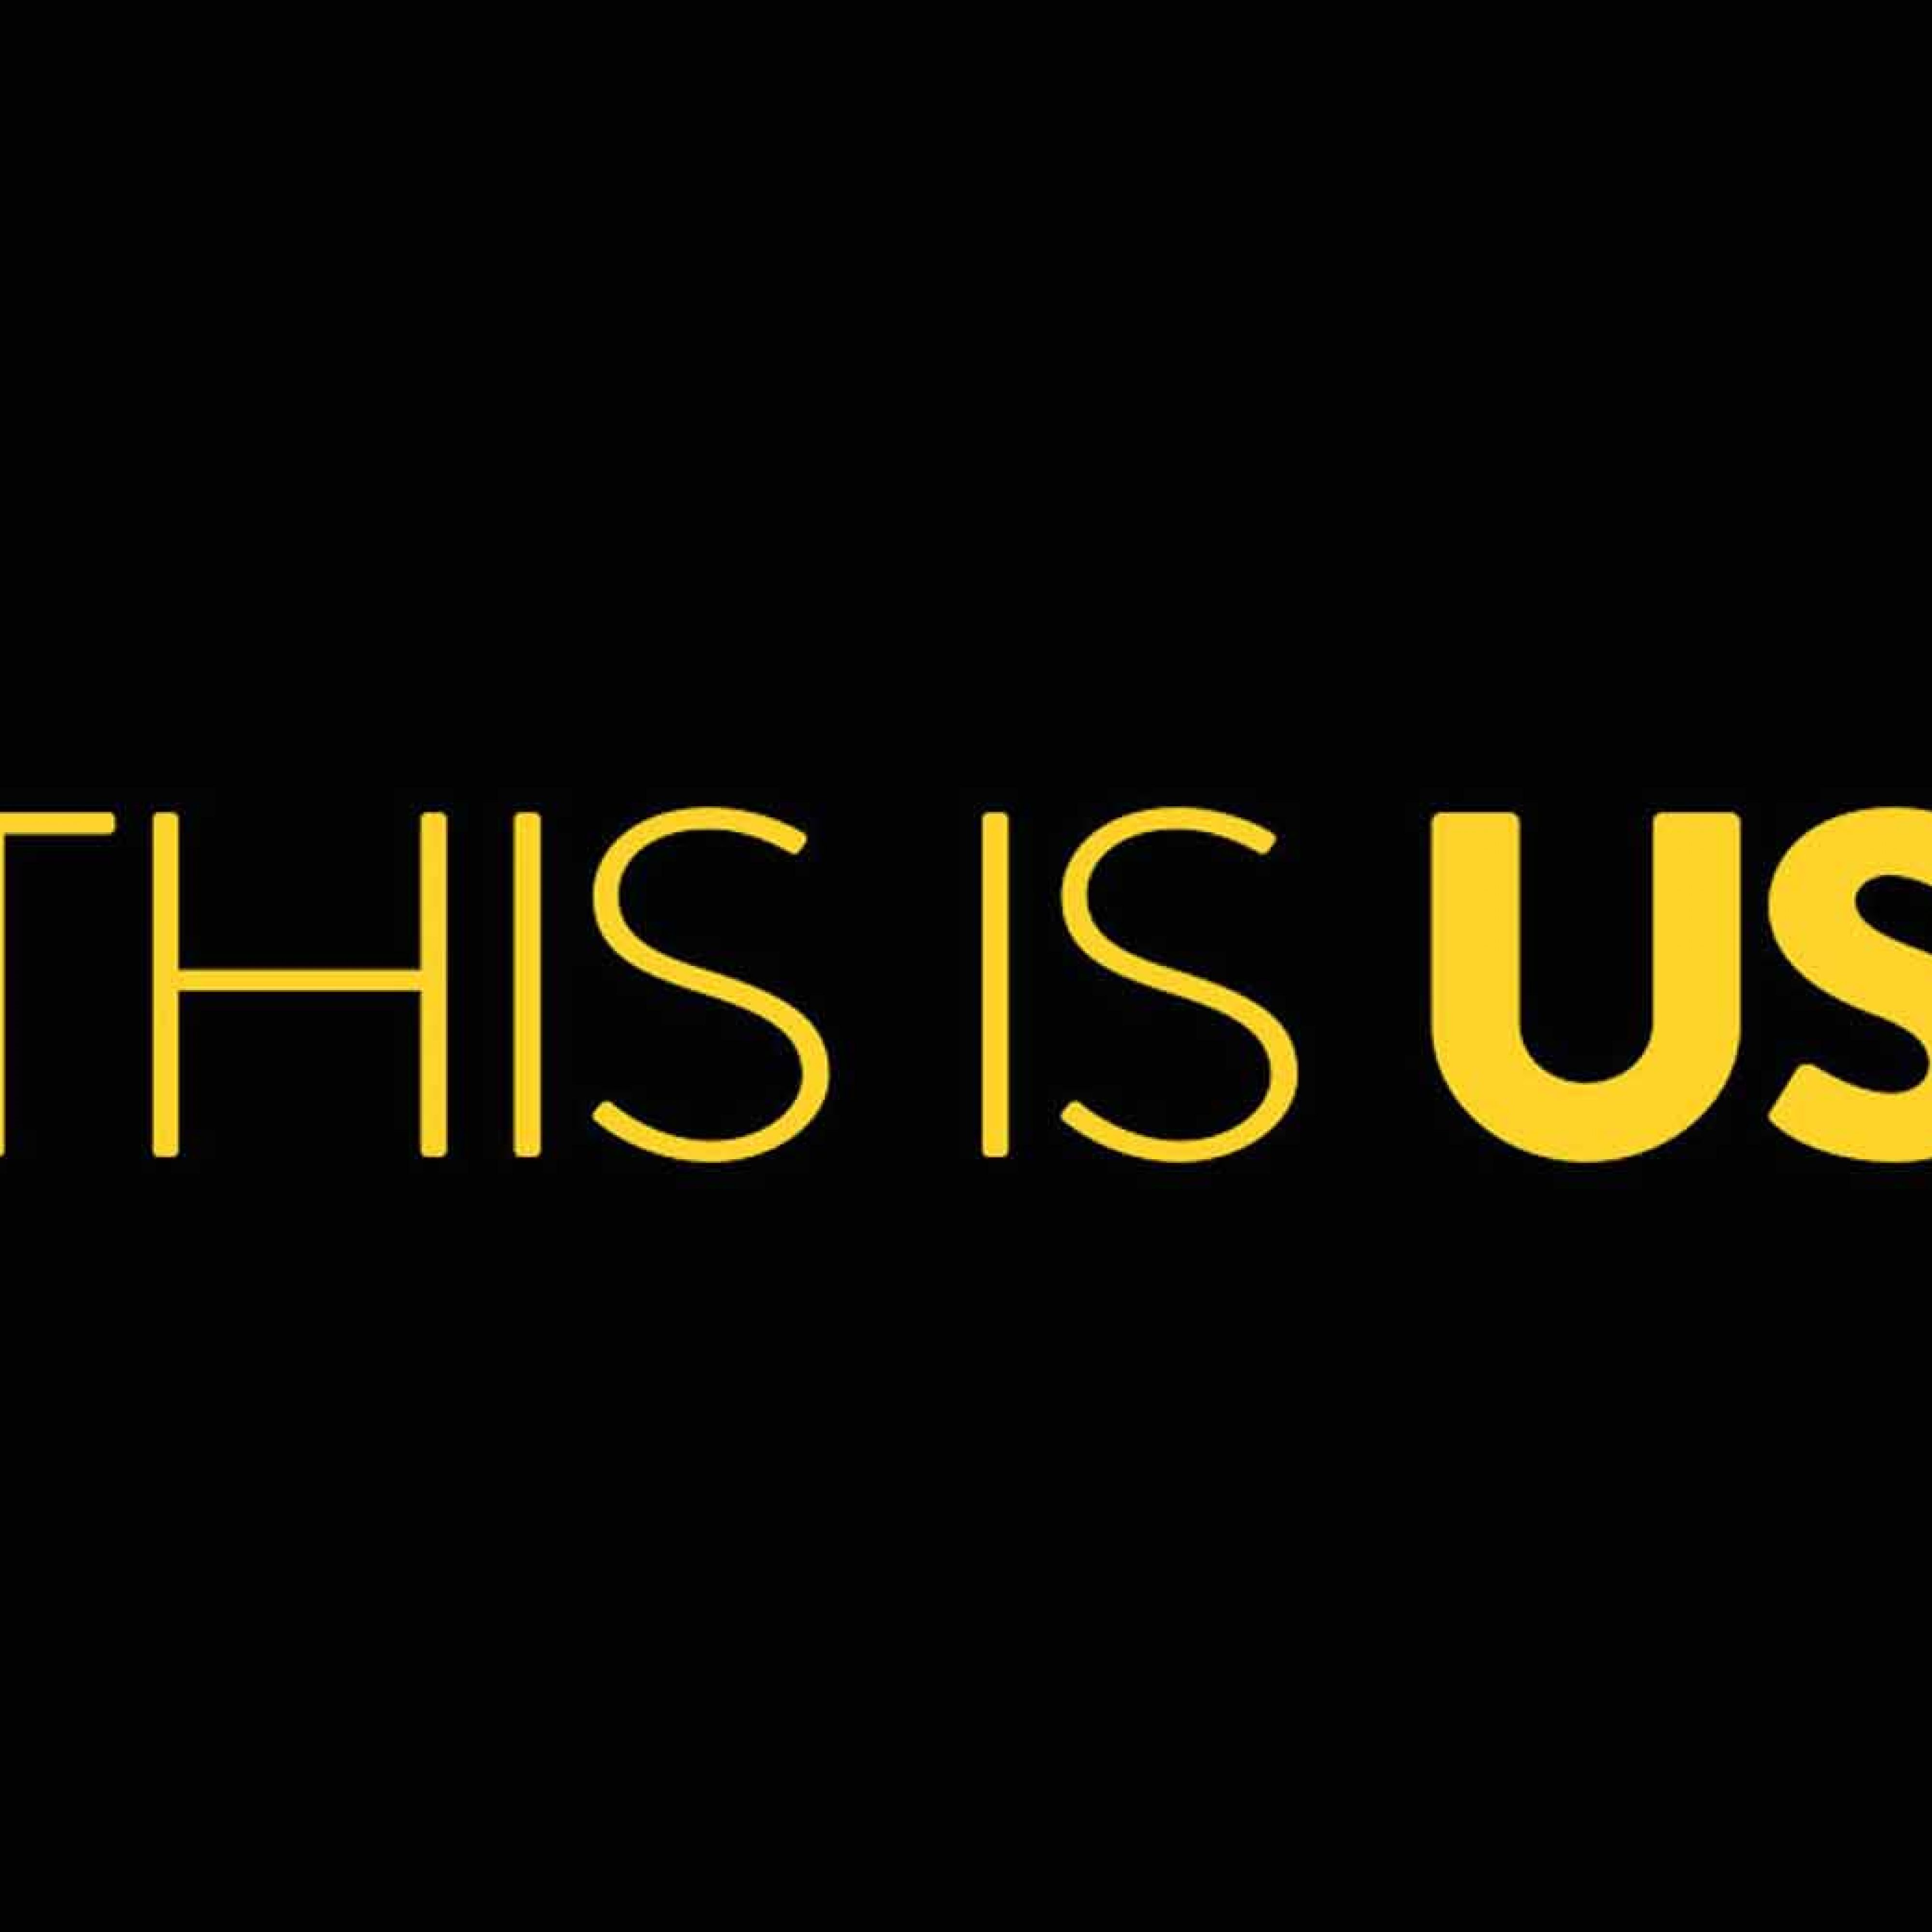 7 Things You May Not Know About "This Is Us"